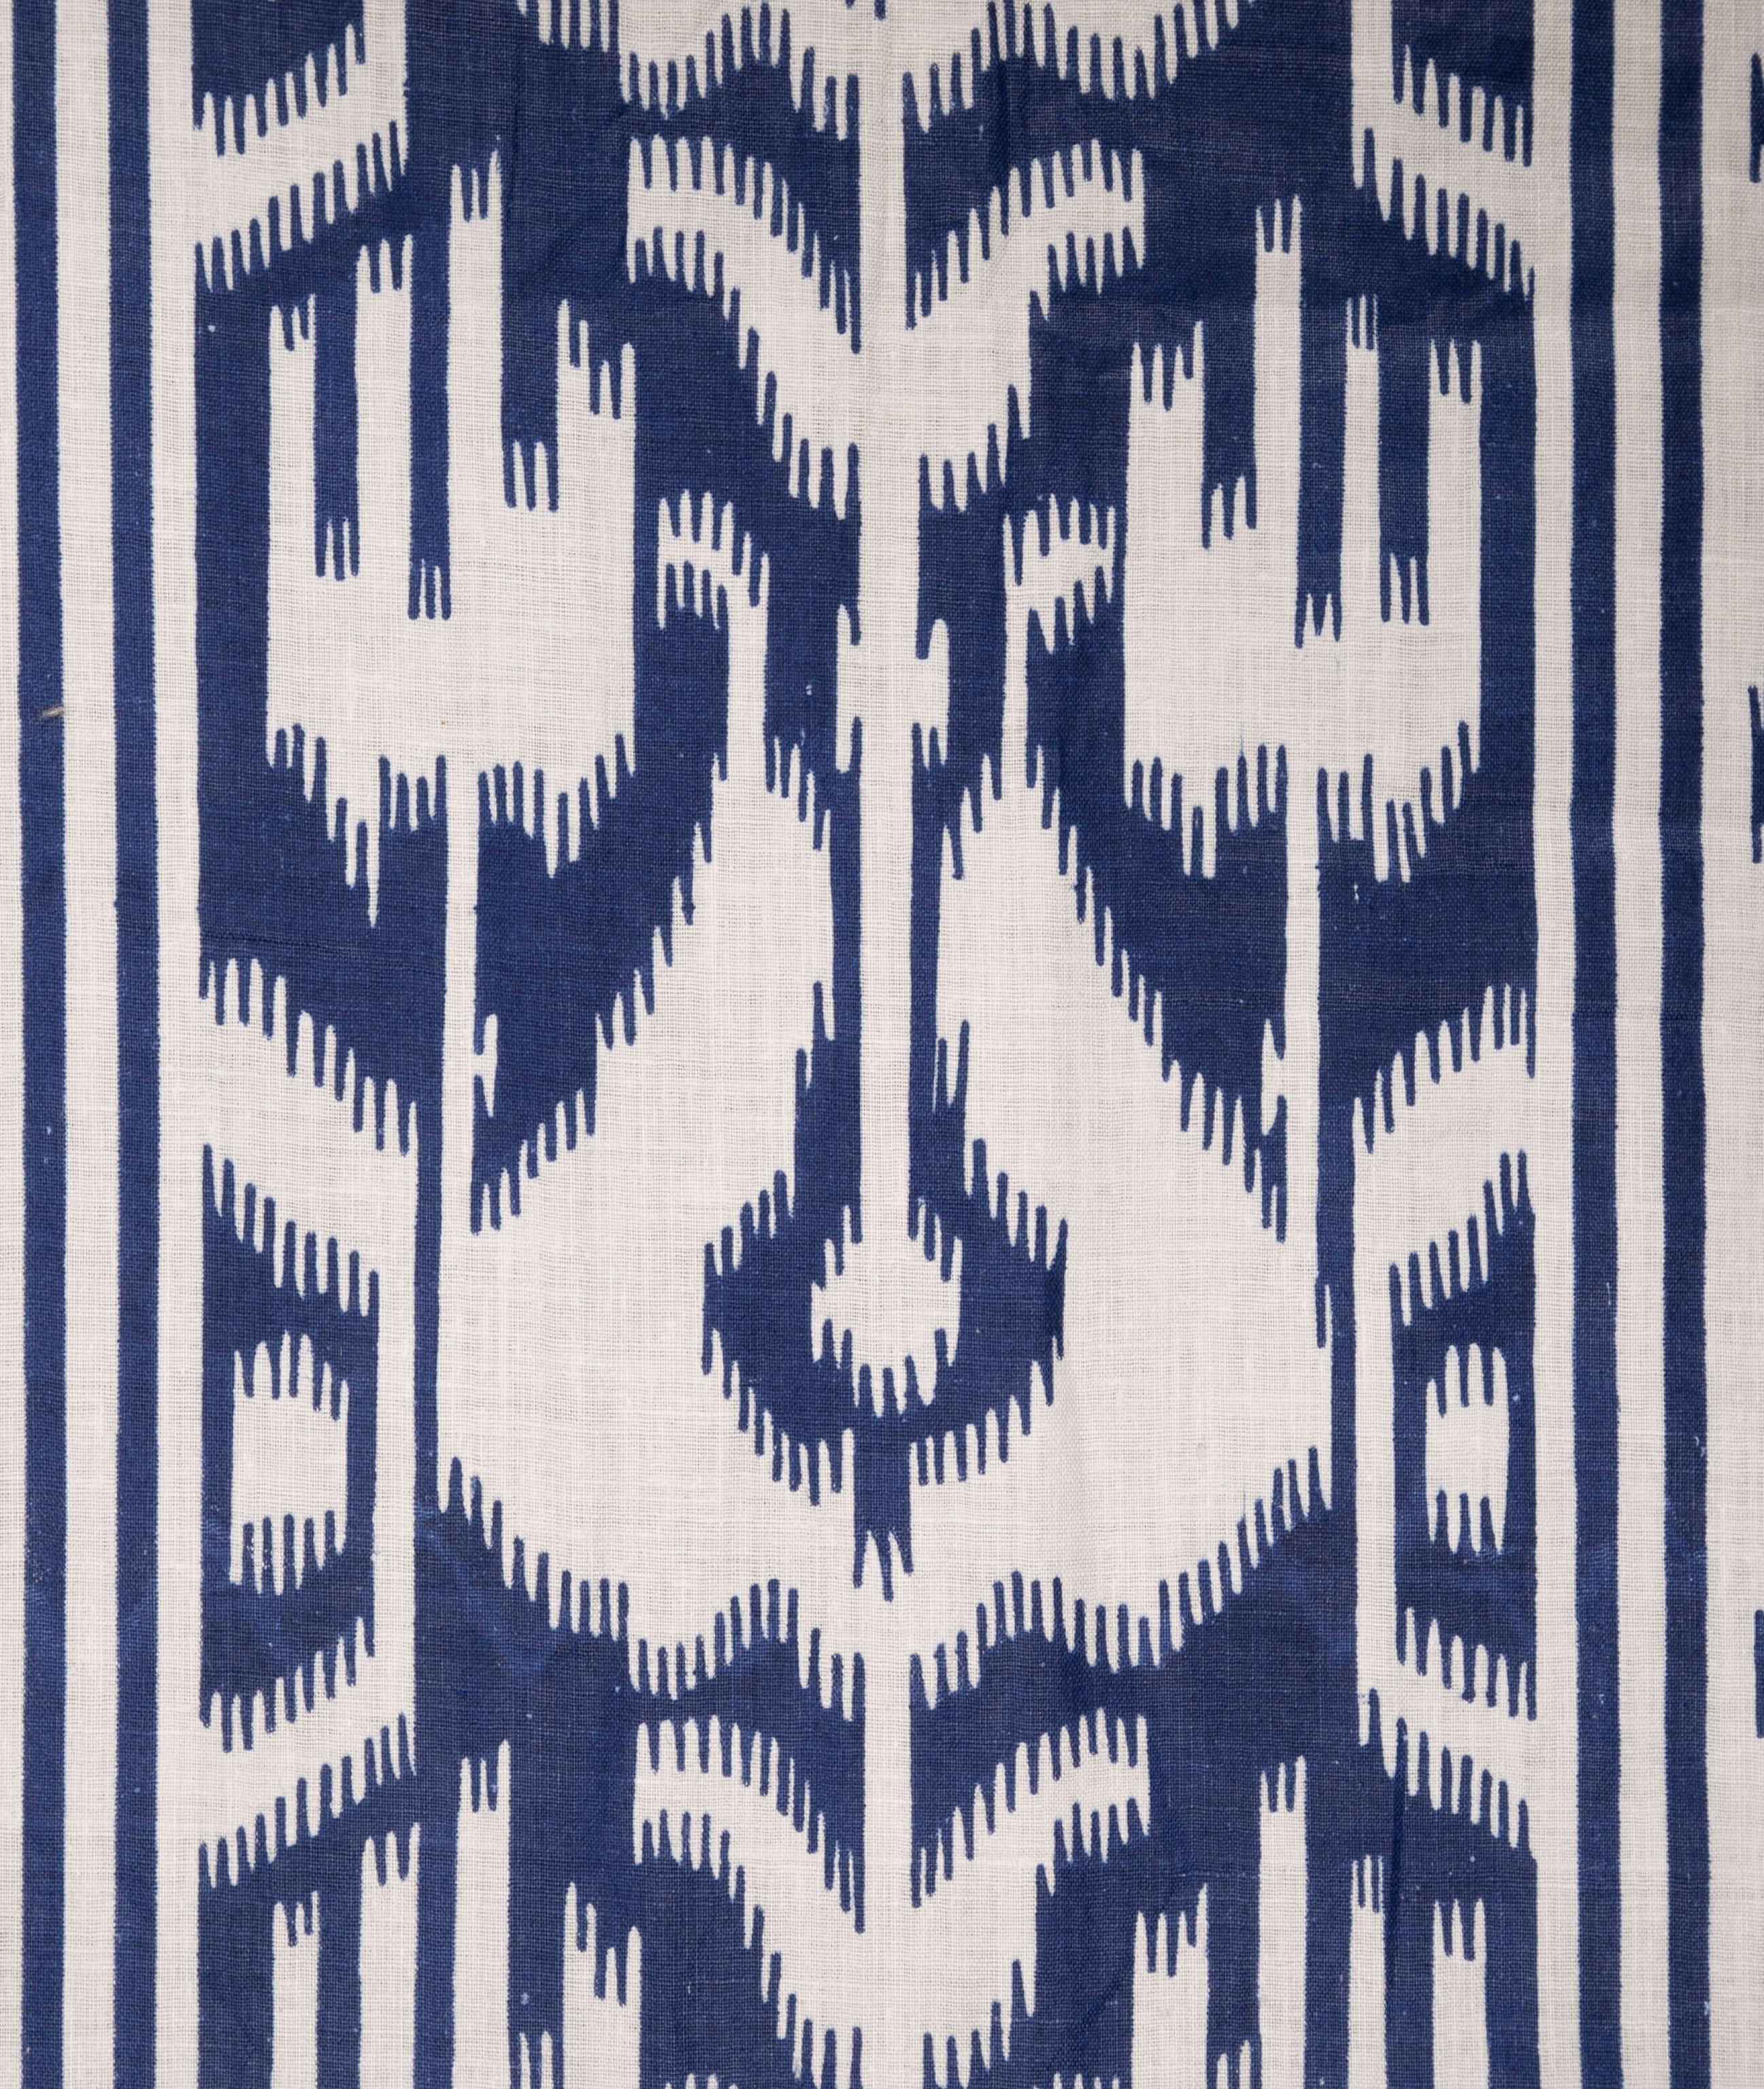 Russian Printed Ikat Design Cotton Fabric Panel, Mid-20th Century or Earlier For Sale 1